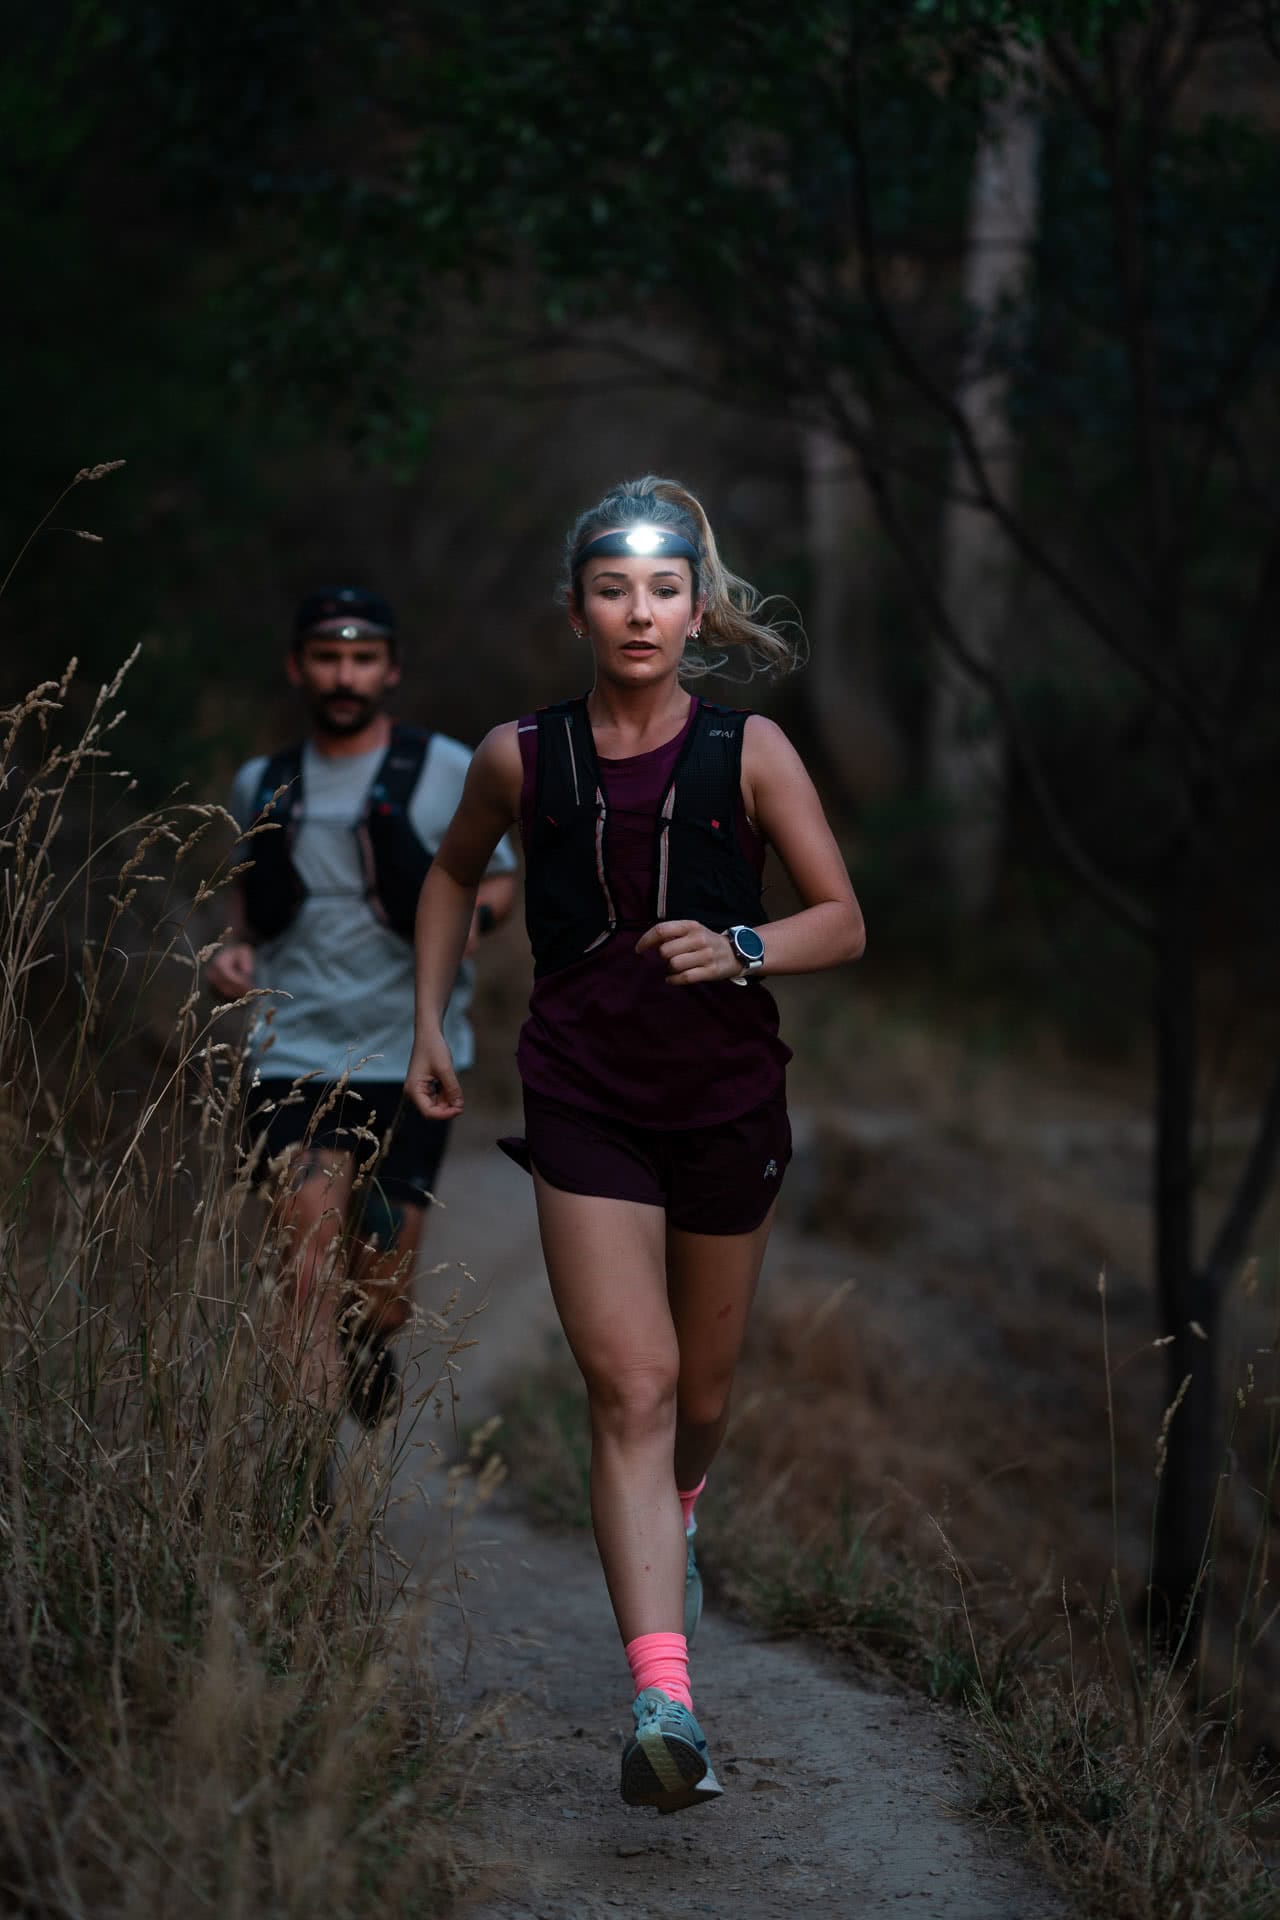 5 Adventures To Make Life Unboring, knog, photo by guy williment, empress canyon, blue mountains, nsw, bilby headlamp, trail running